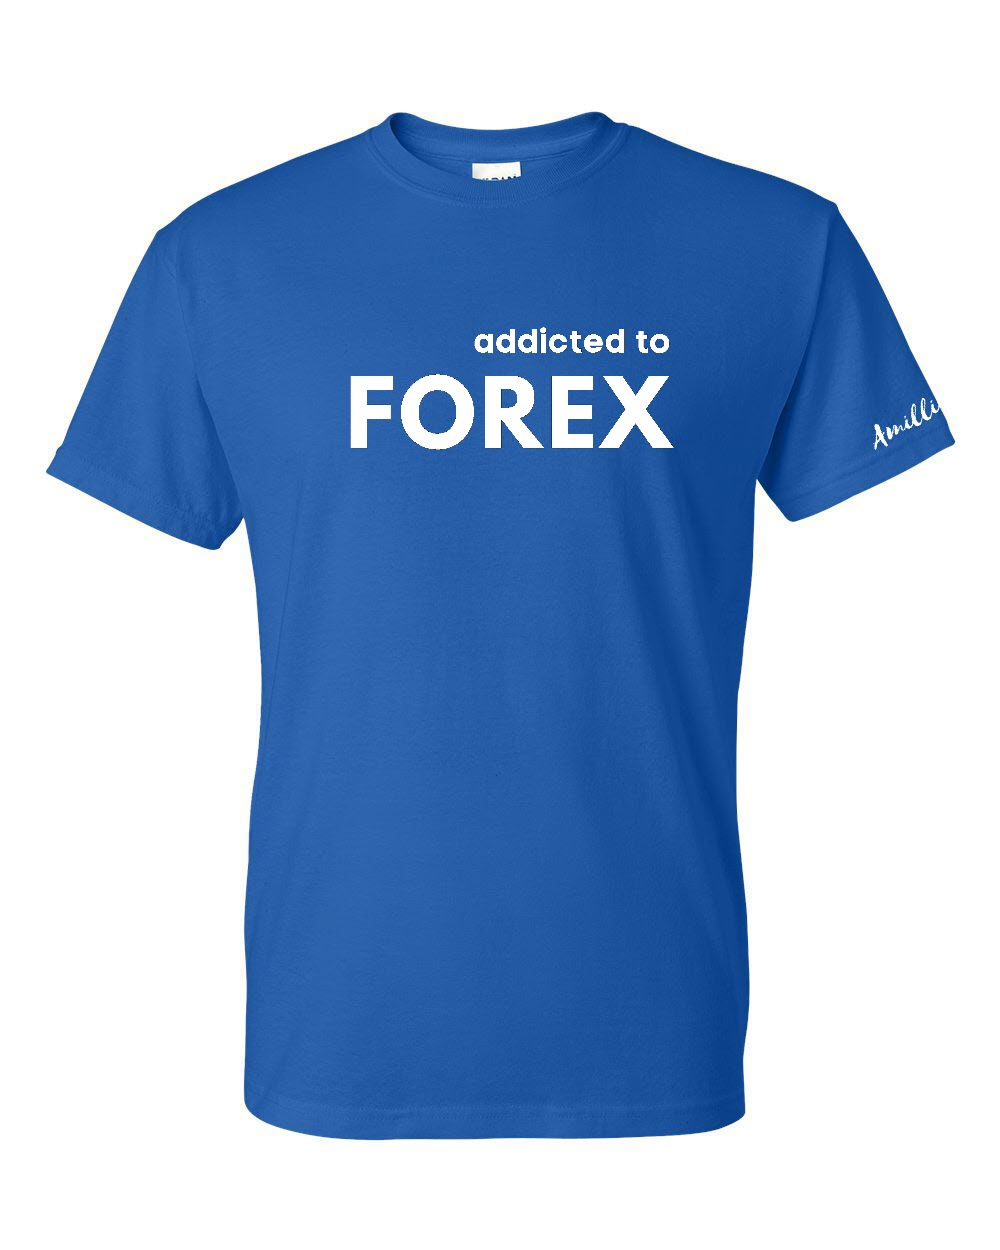 Addicted to FOREX